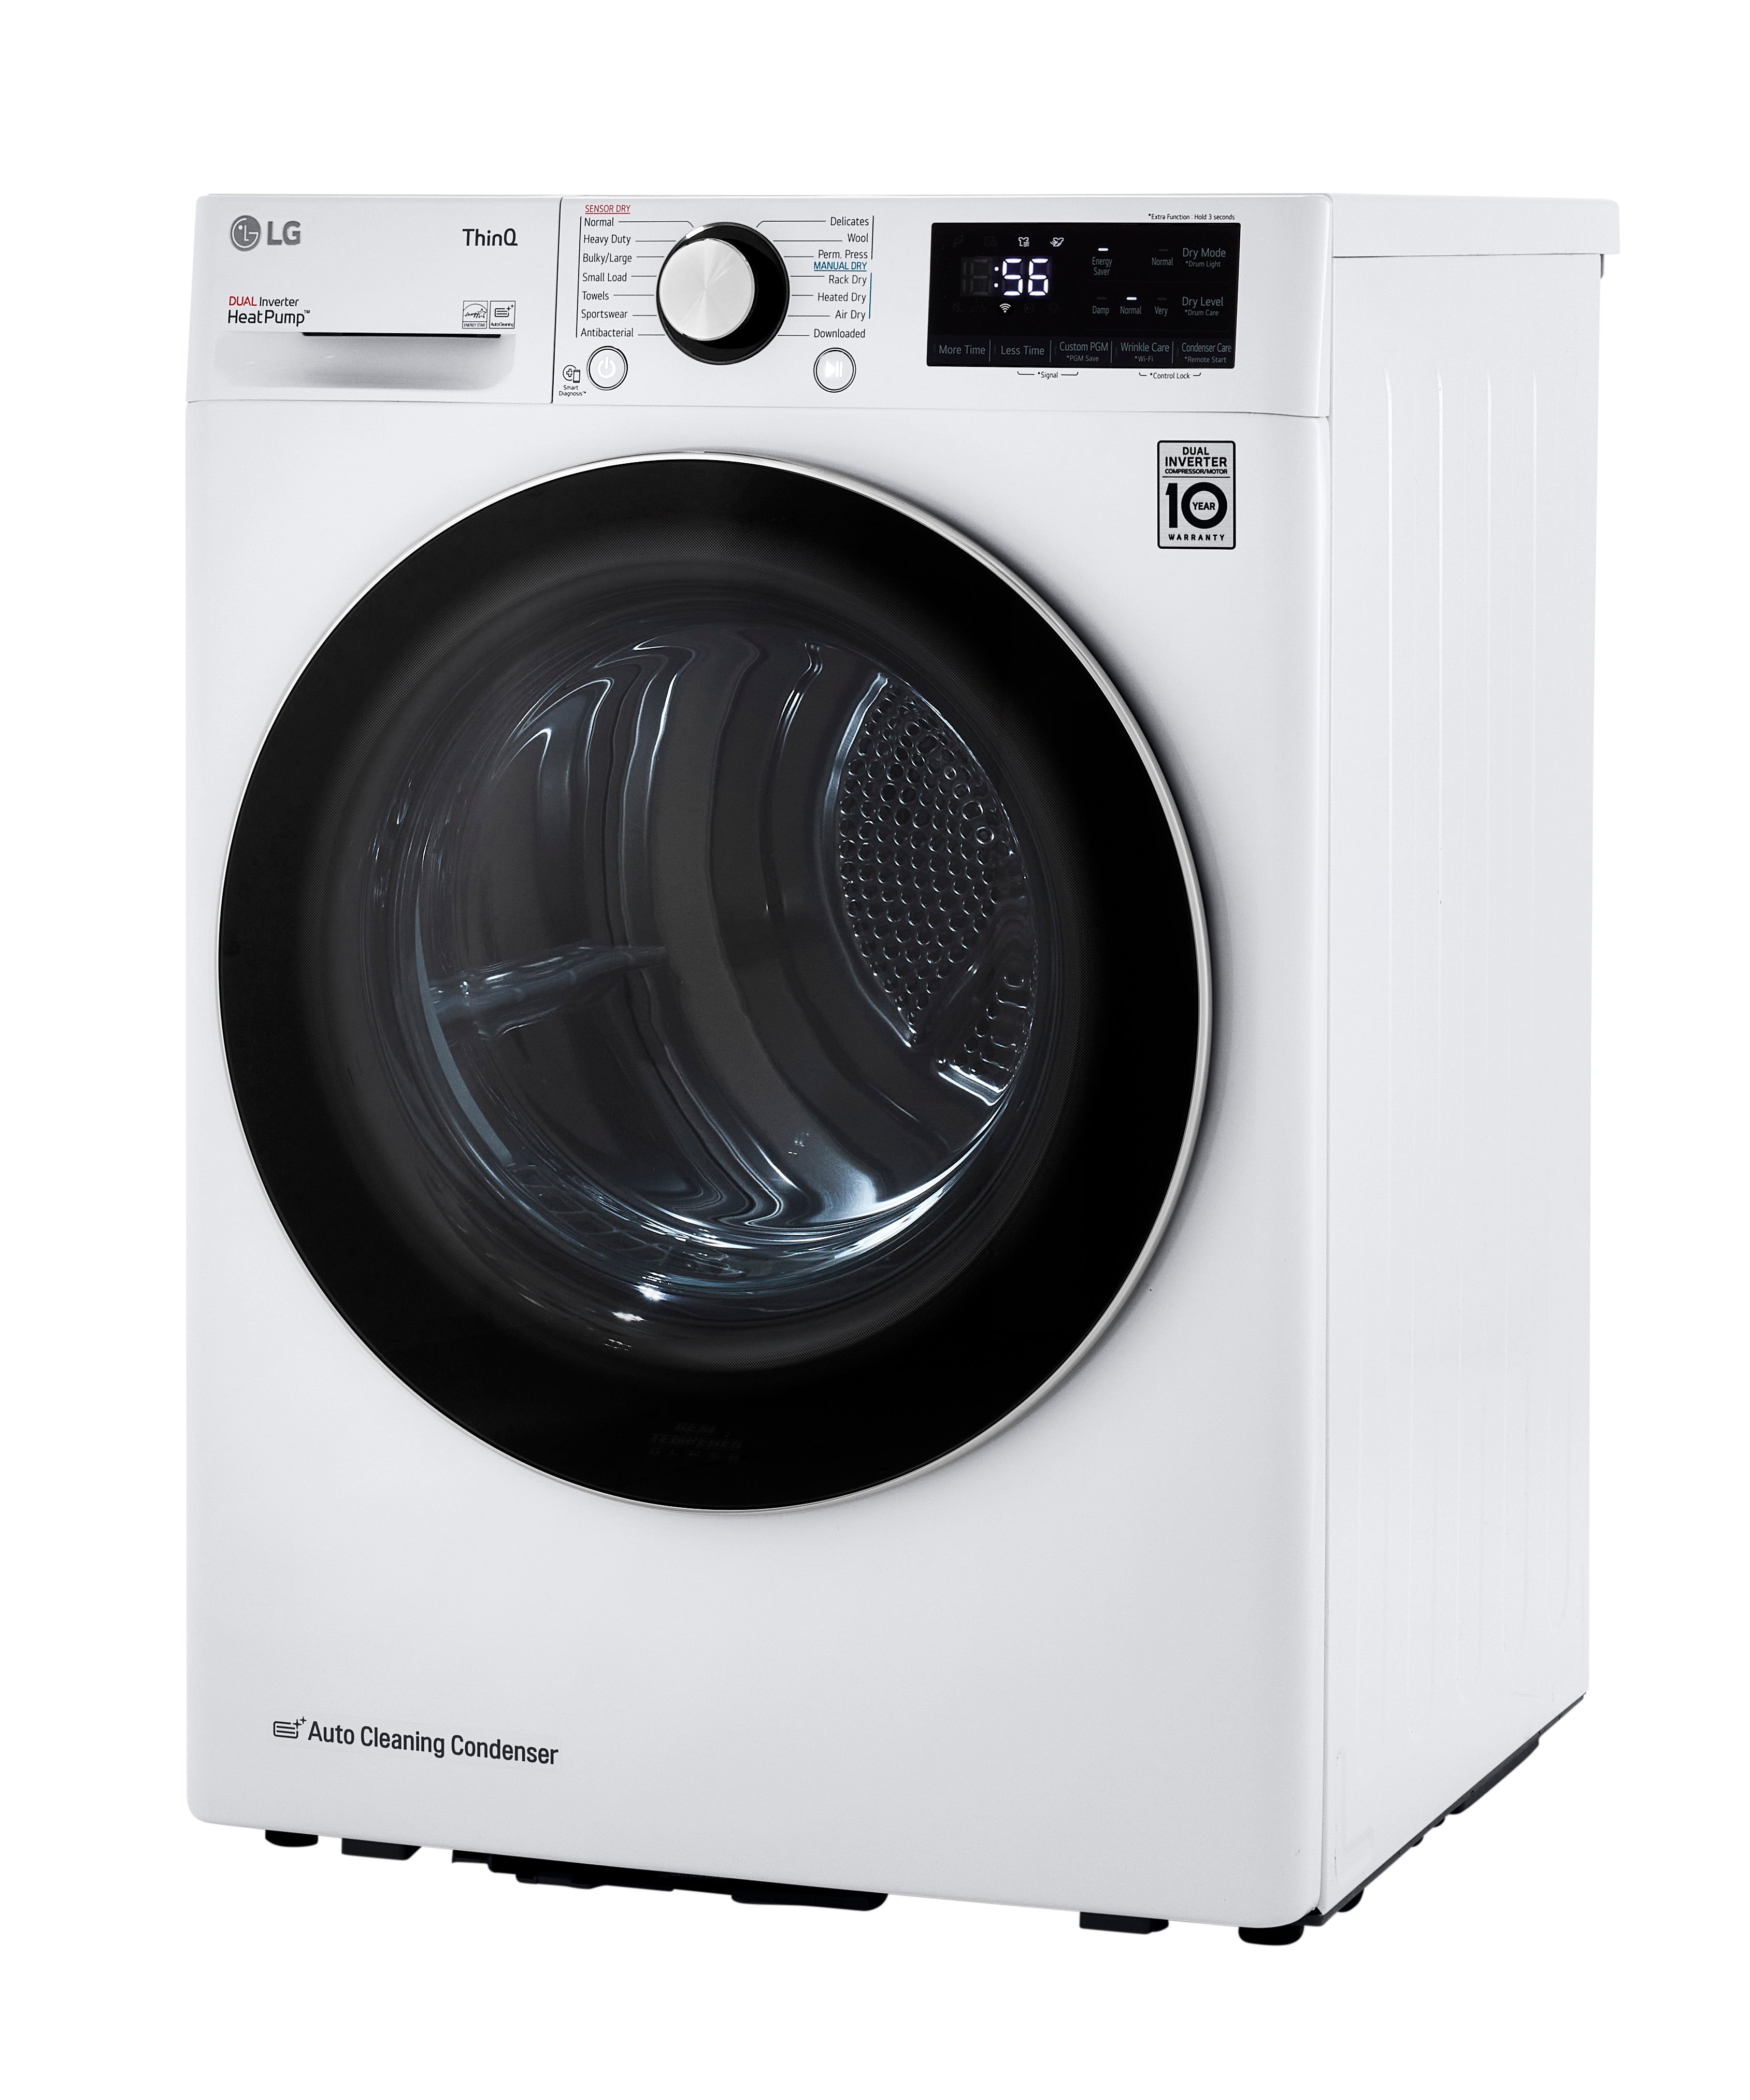 LG - 4.2 cu. Ft  Compact Dryer in White - DLHC1455W